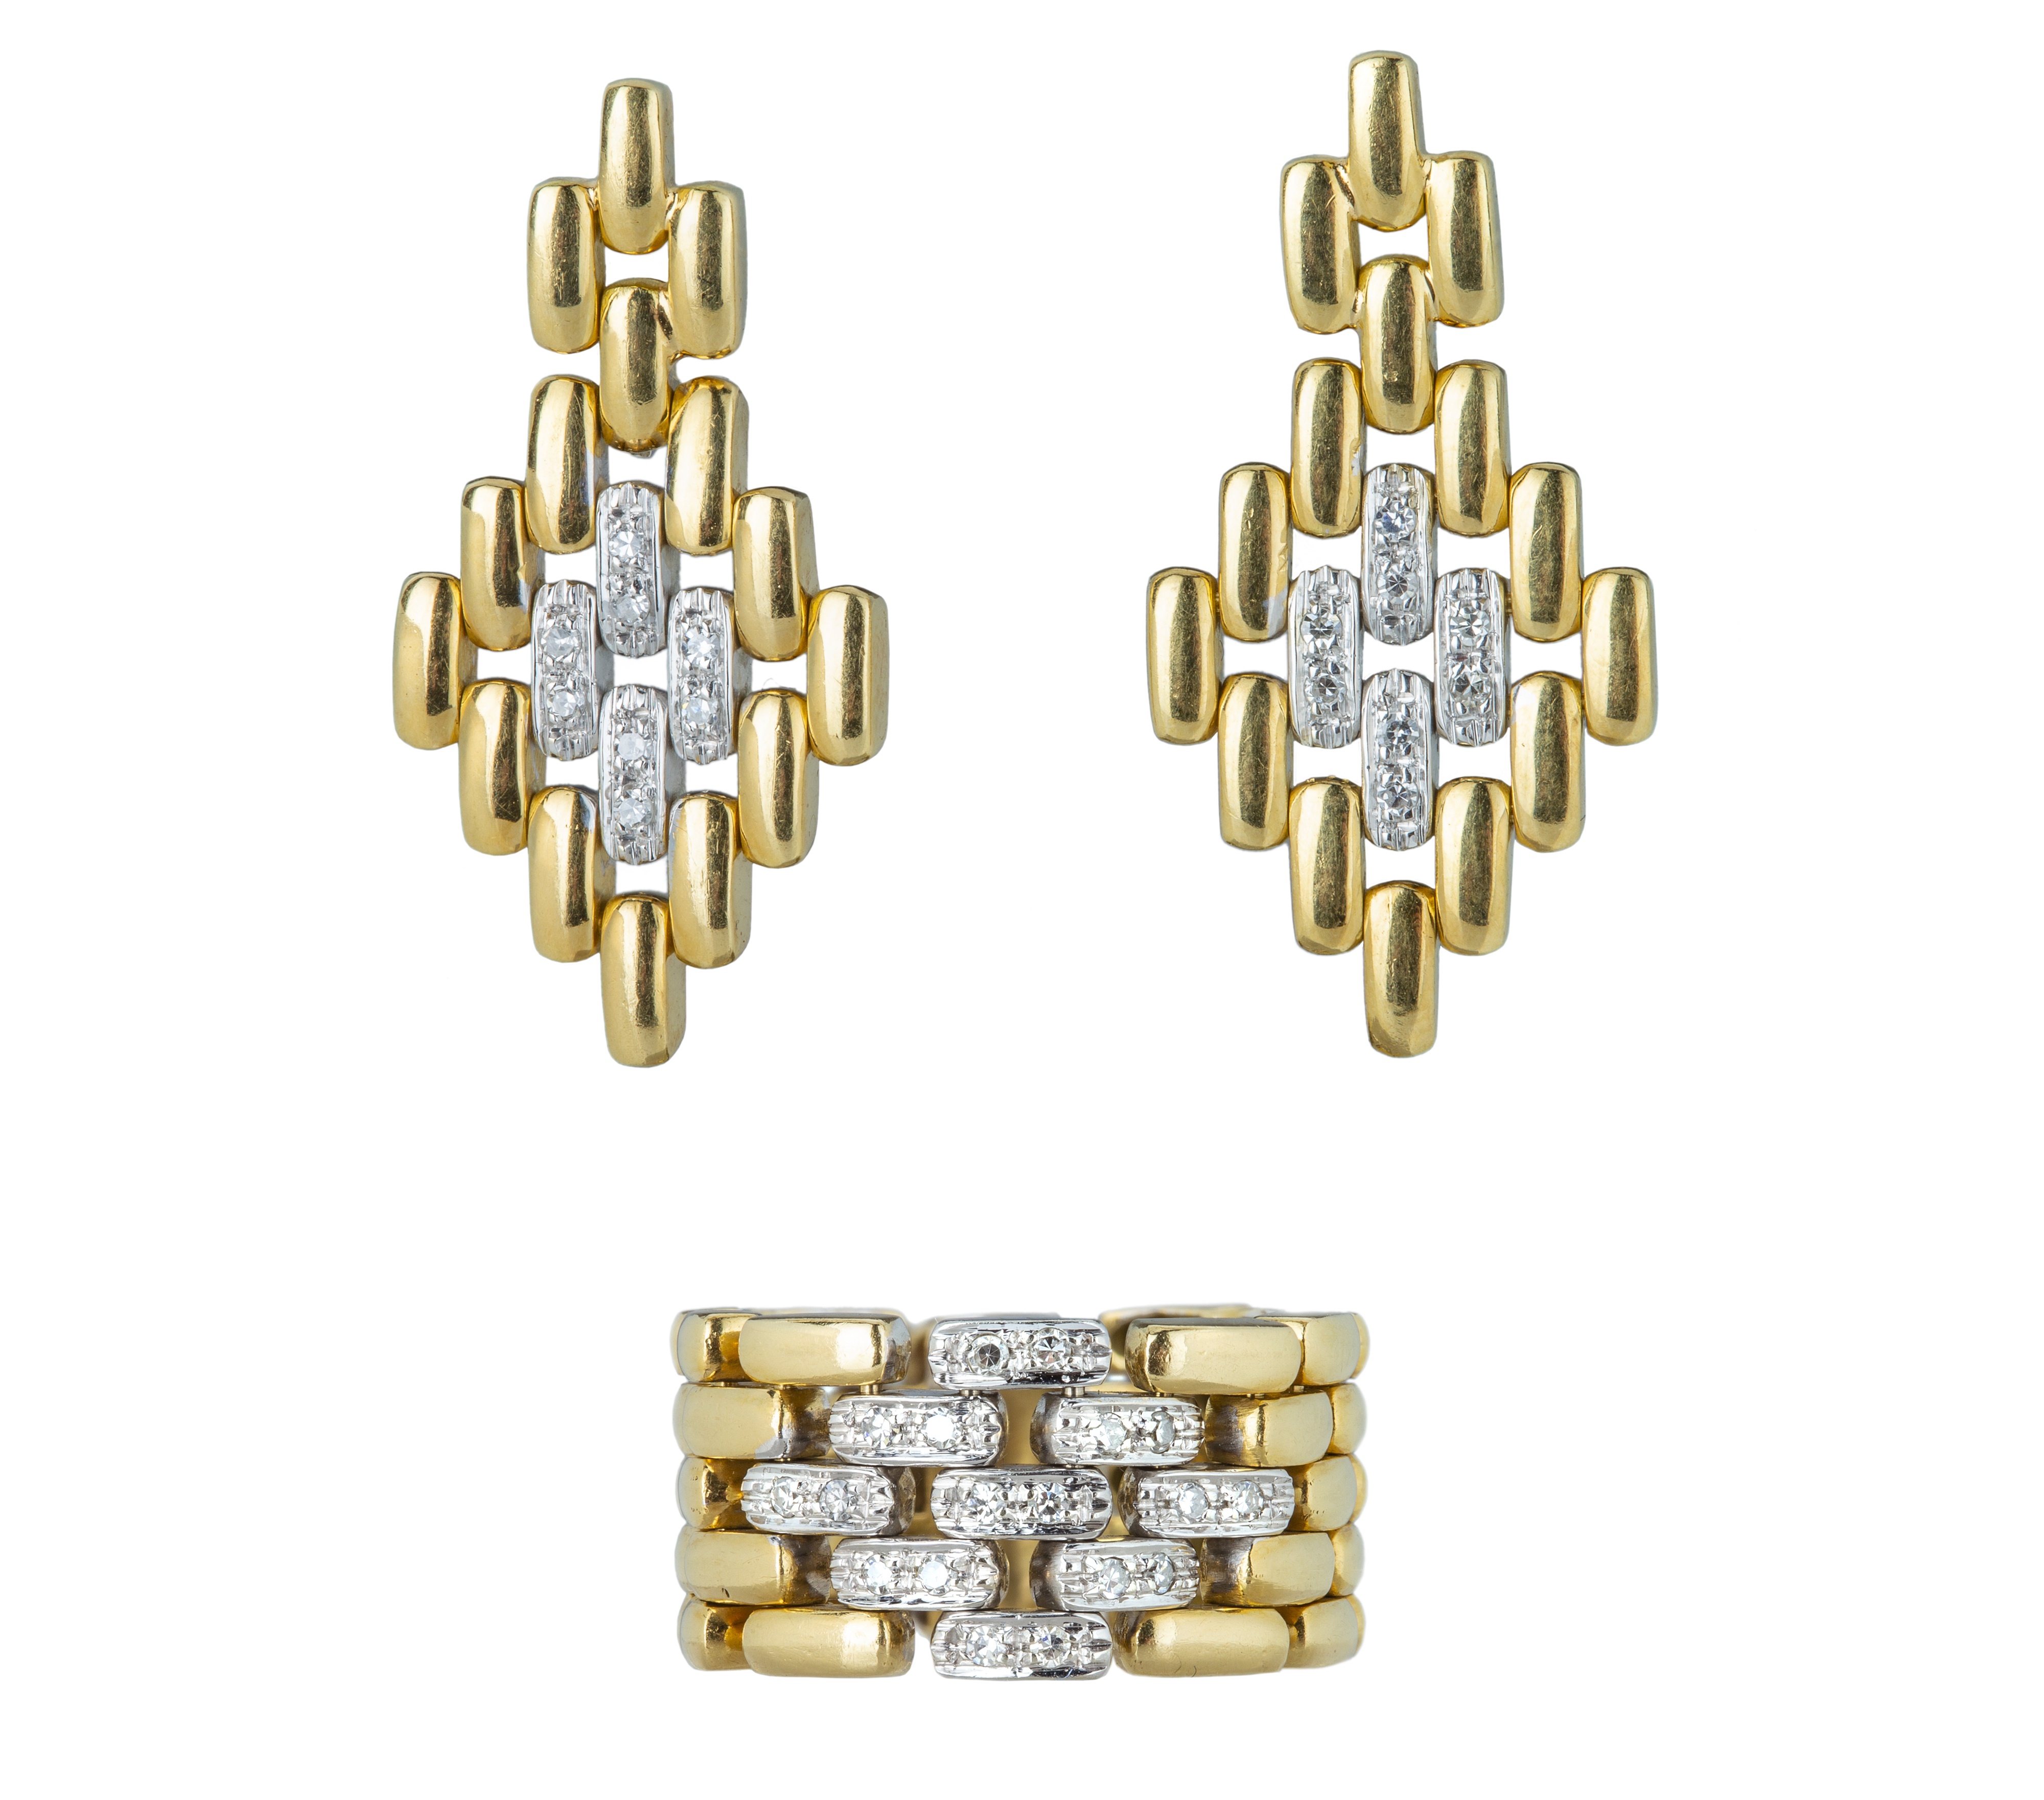 A 1960s yellow gold and diamond tank-track ring and earring set.